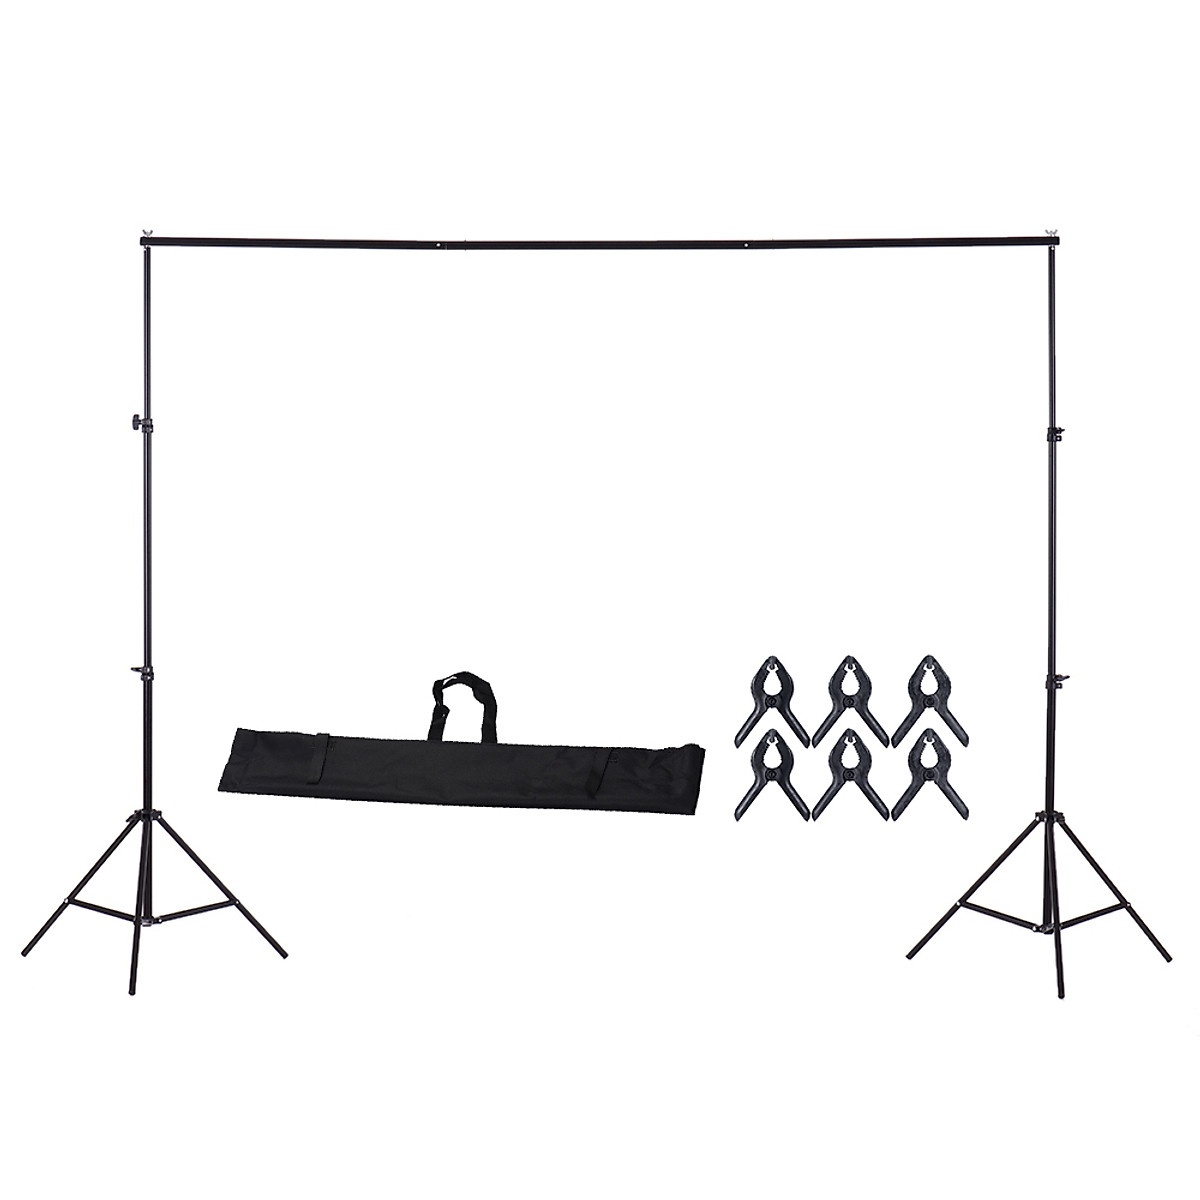 Mua 200 * 200cm/78 * 78inches Aluminium Alloy Adjustable Photography Studio Background  Backdrop Stand Support System Kit